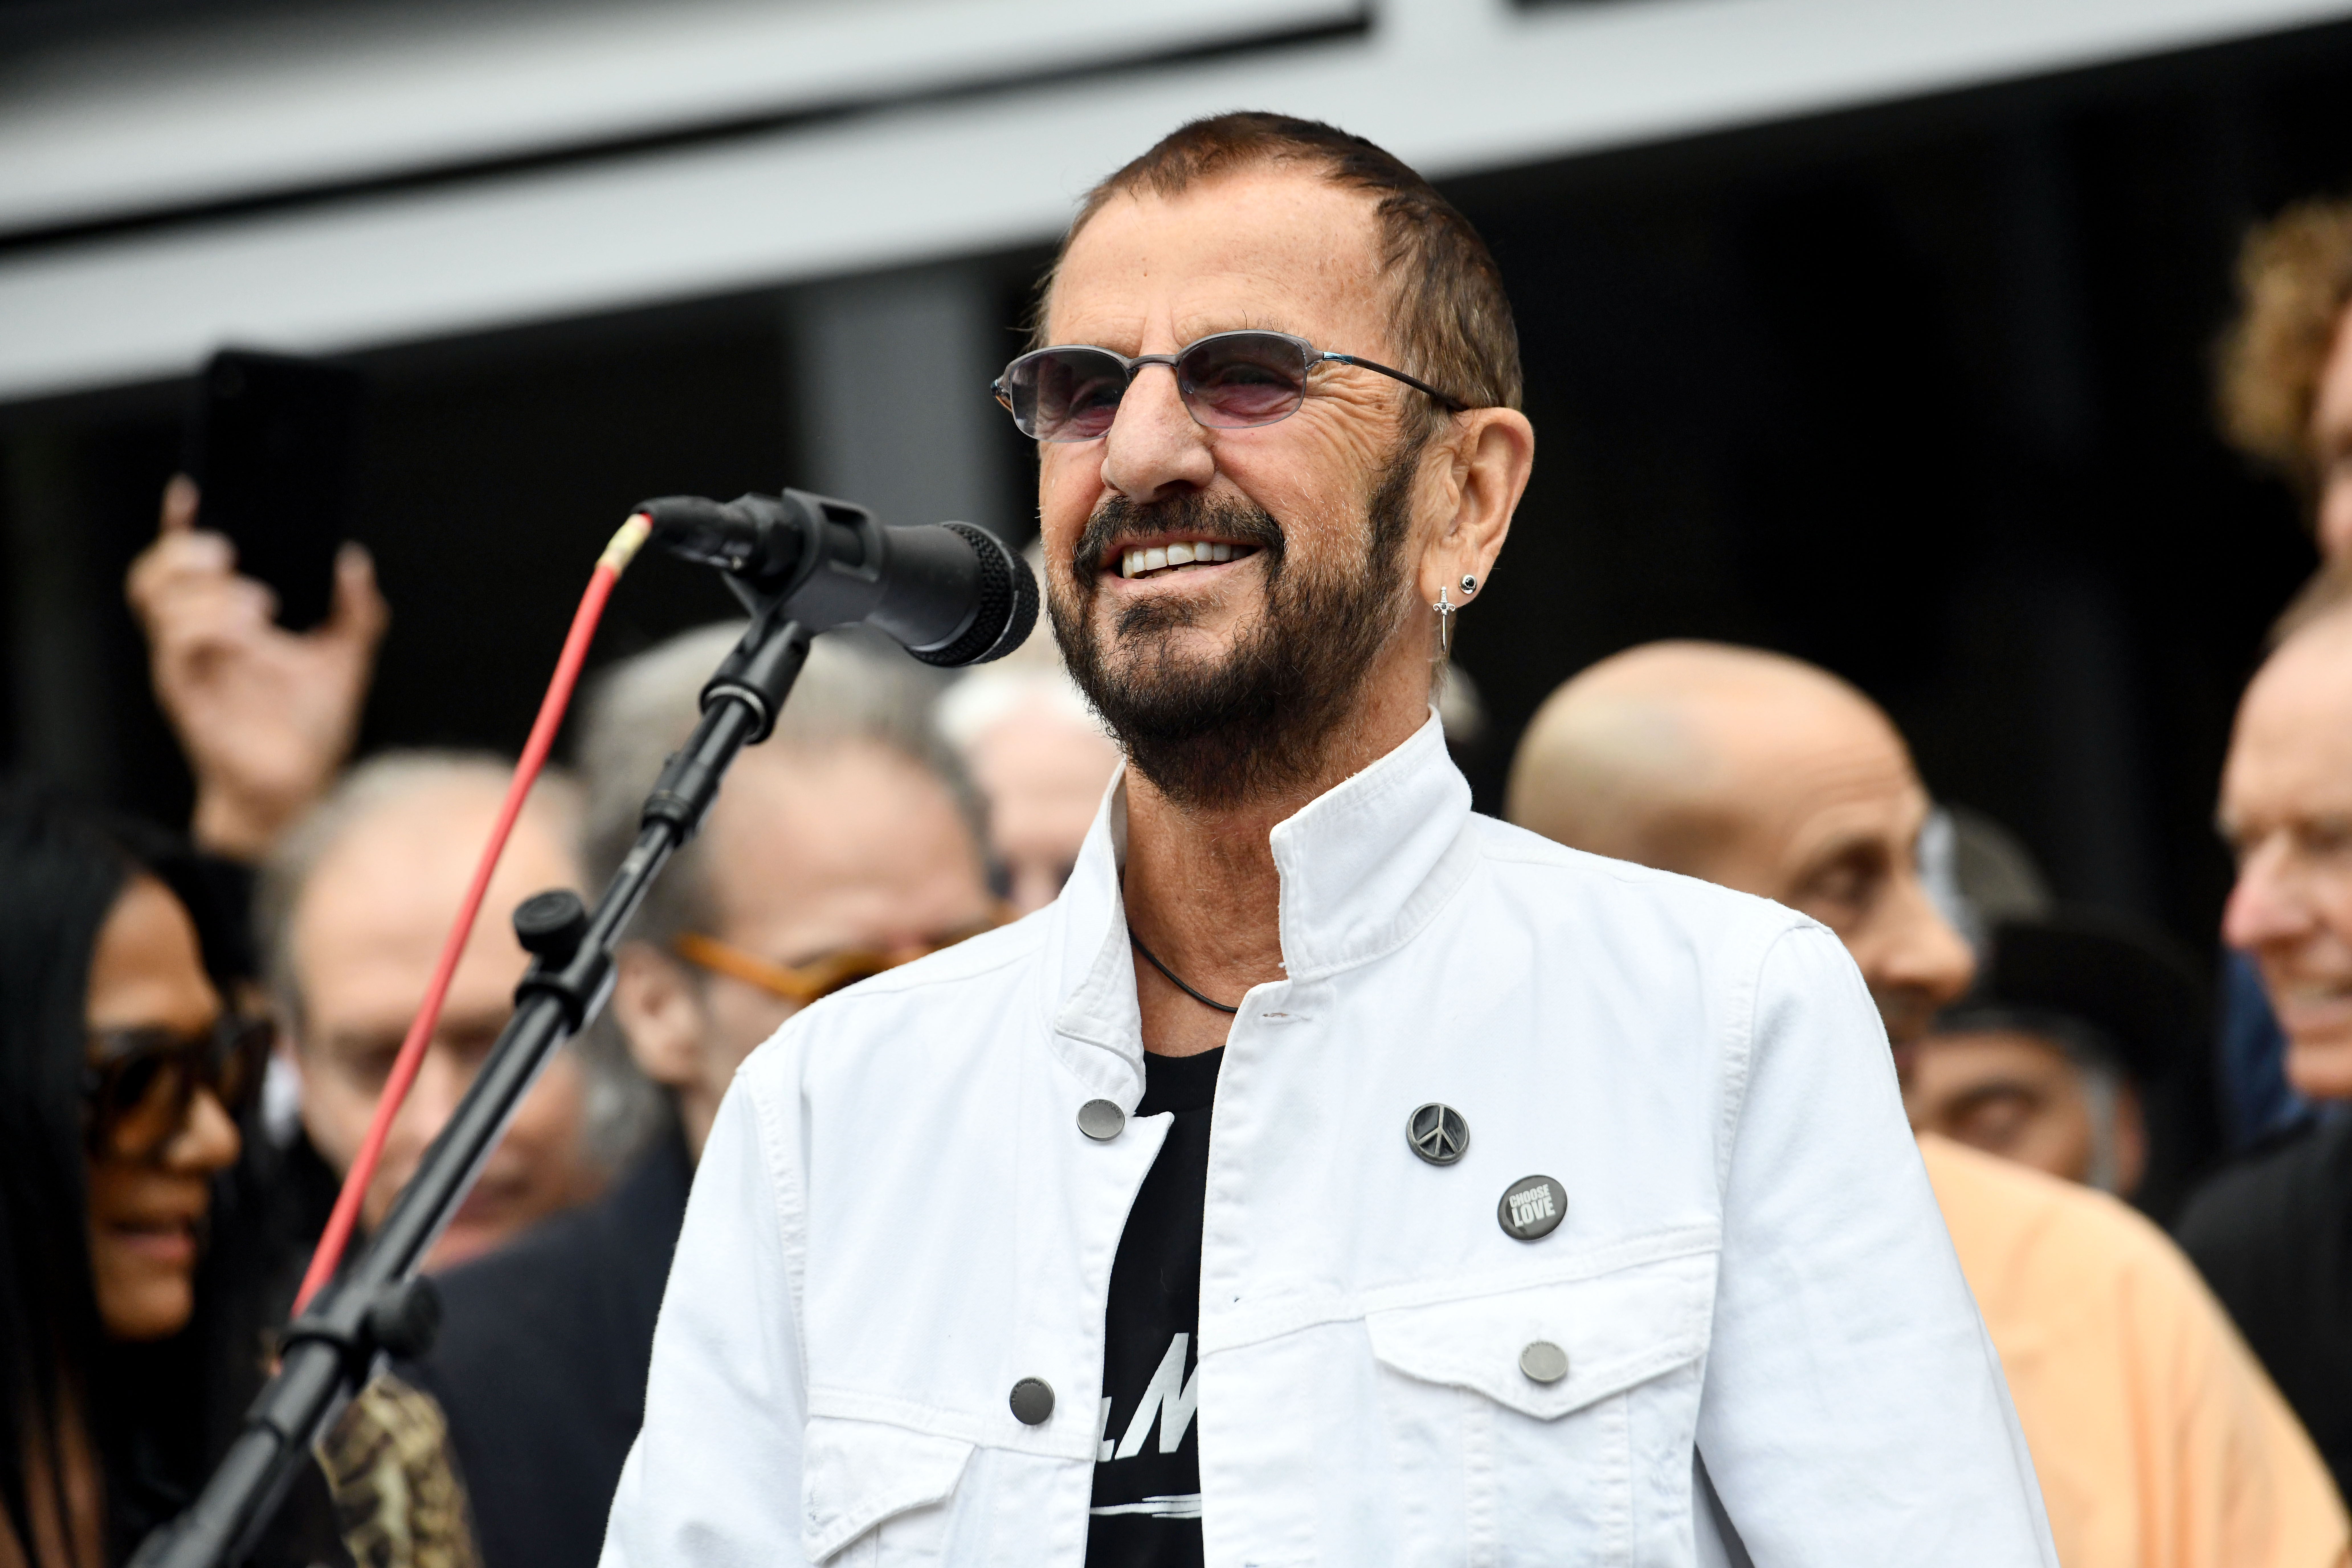 Ringo Starr smiles at the crowd at the 11th annual Peace and Love Birthday Celebration honoring his 79th birthday in 2019 wearing a white denim jacket and his trademark violet sunglasses.